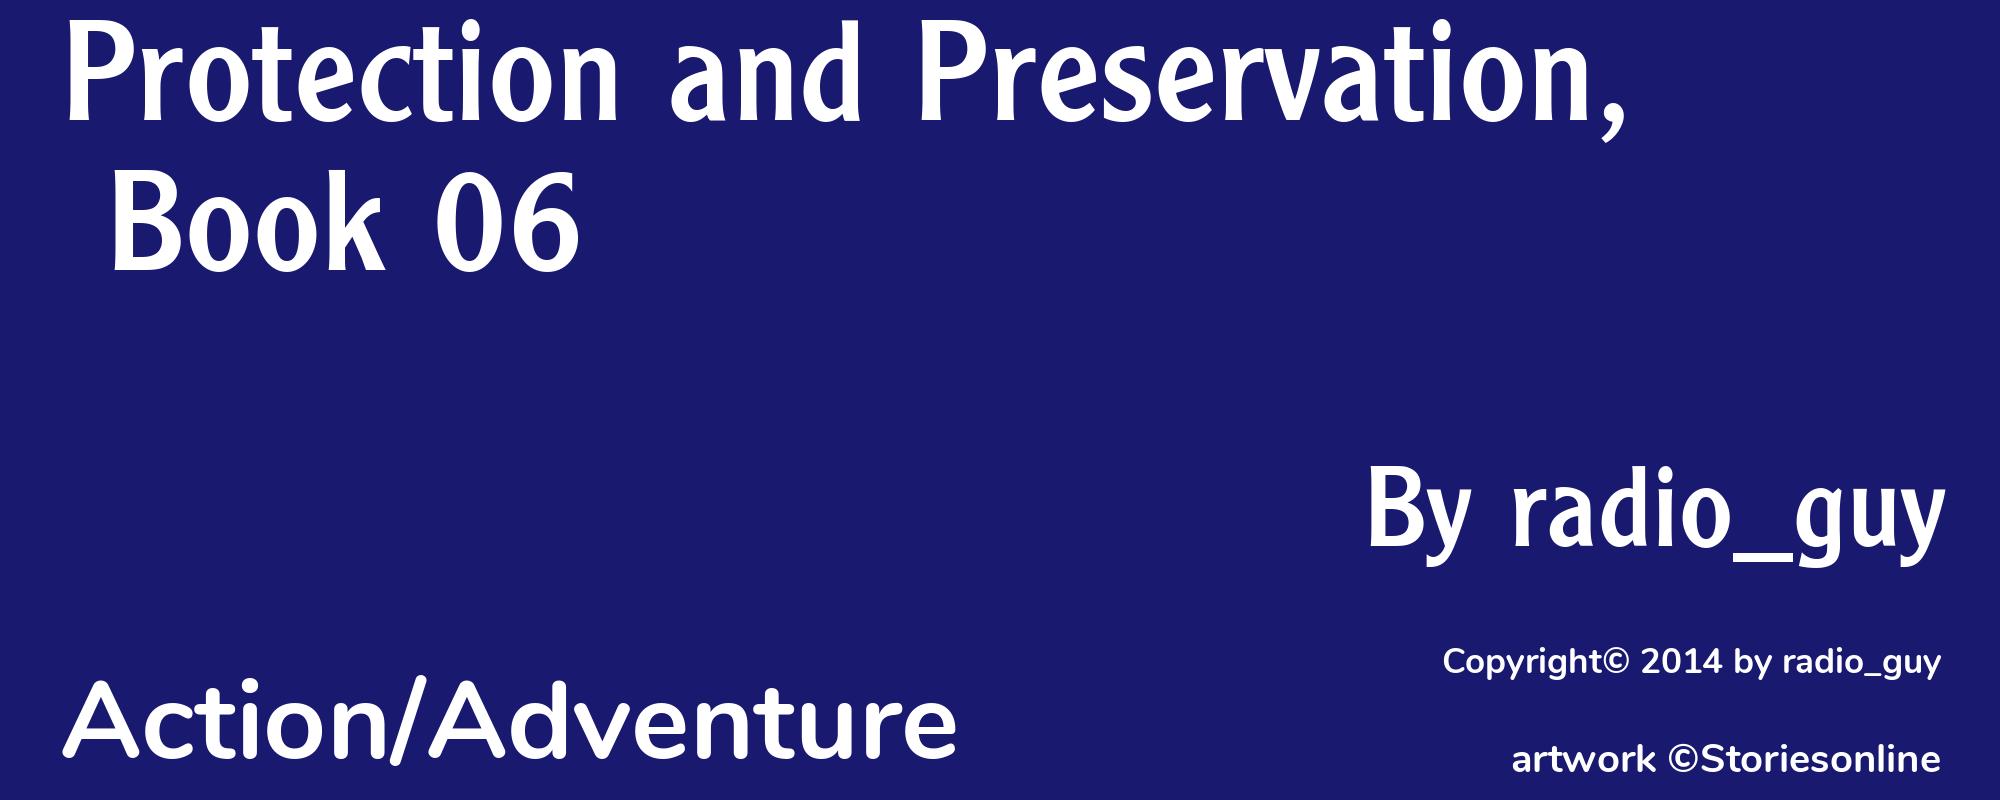 Protection and Preservation, Book 06 - Cover